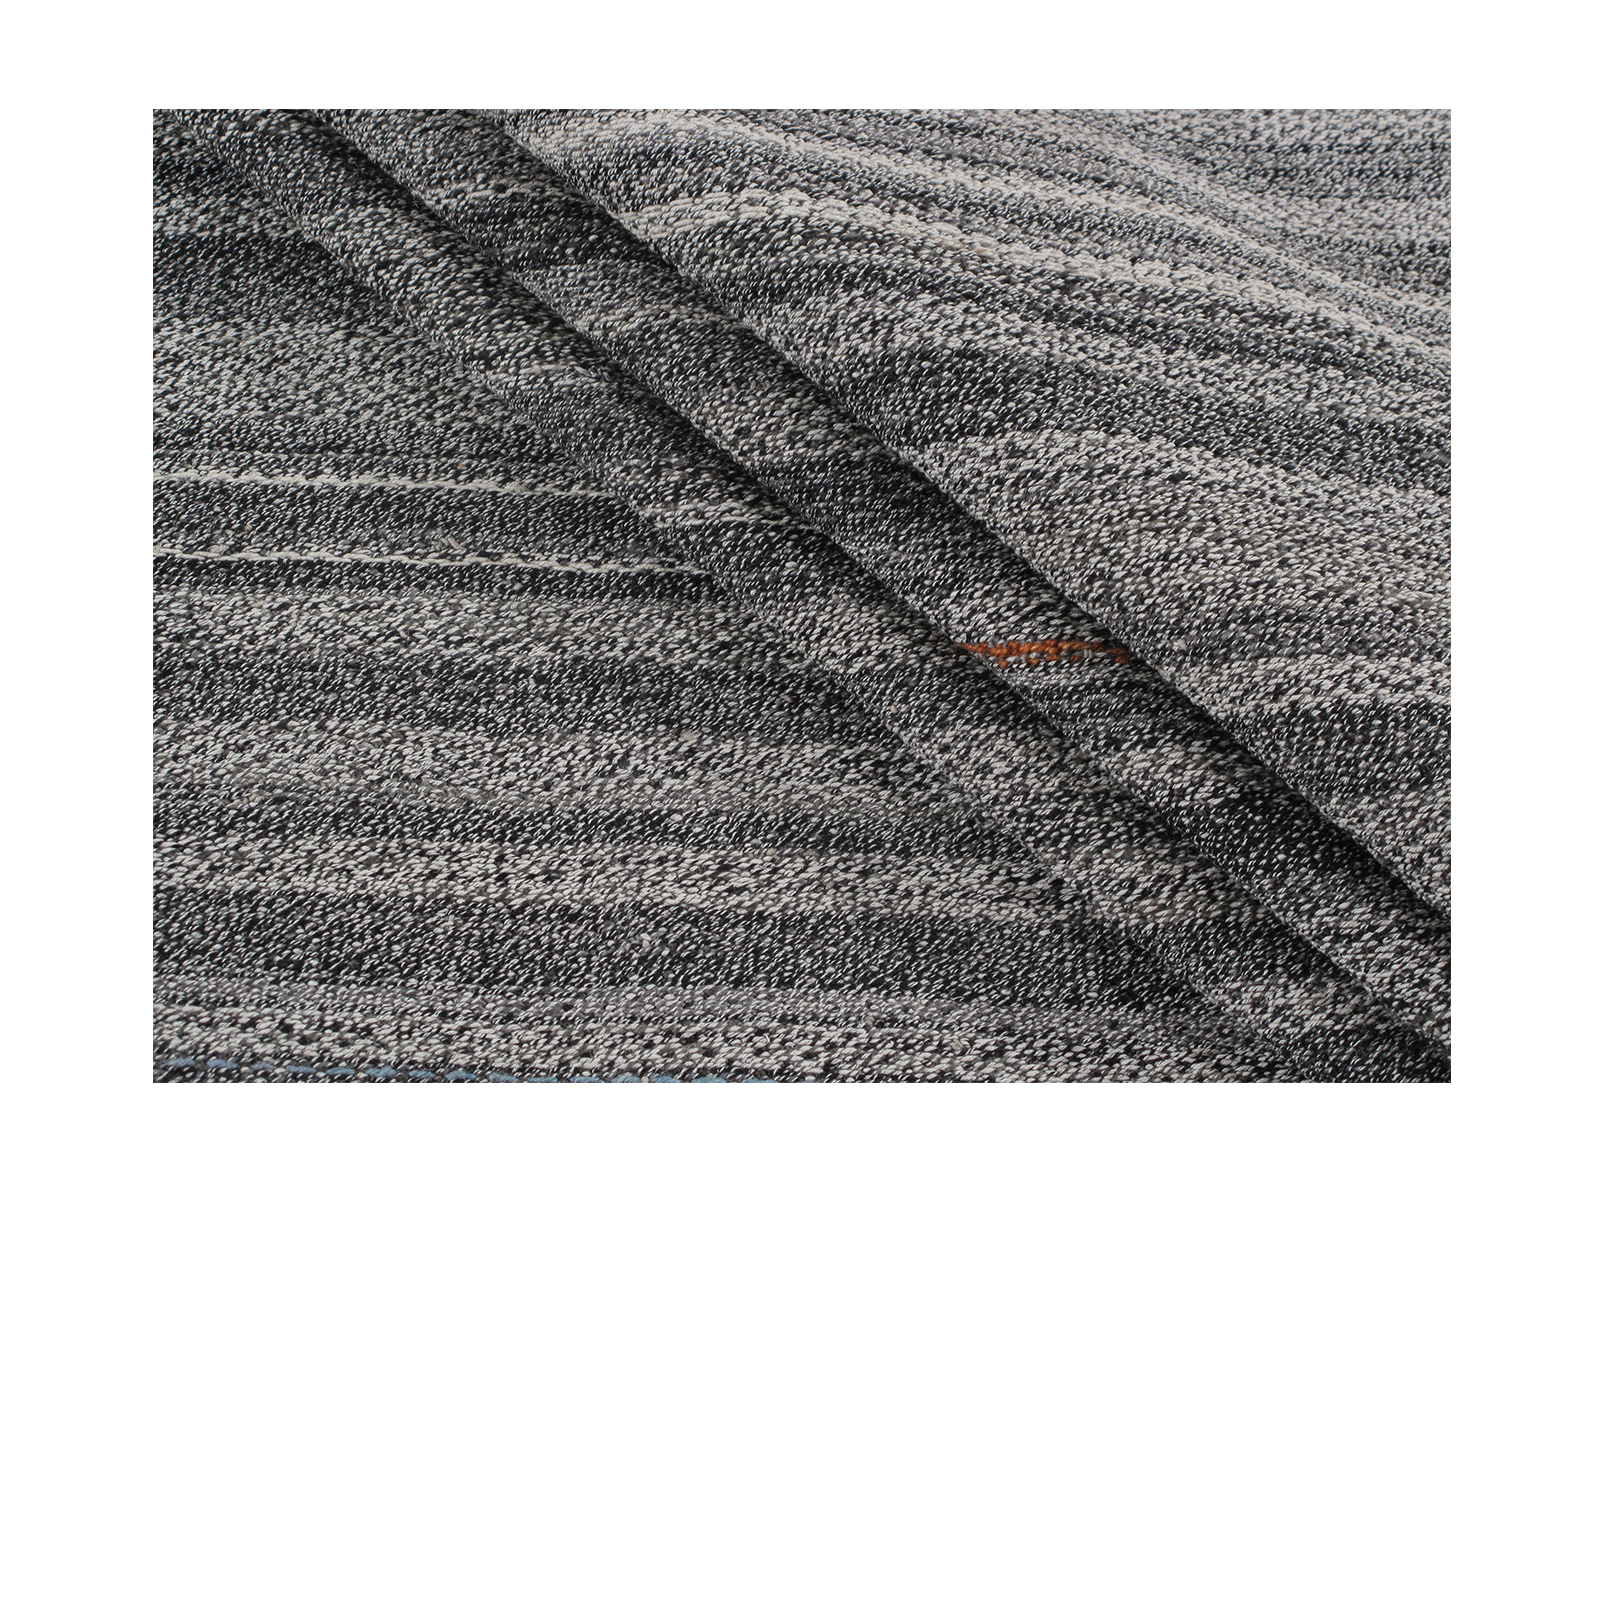 This Damavand rug is hand woven and made of handspun wool.